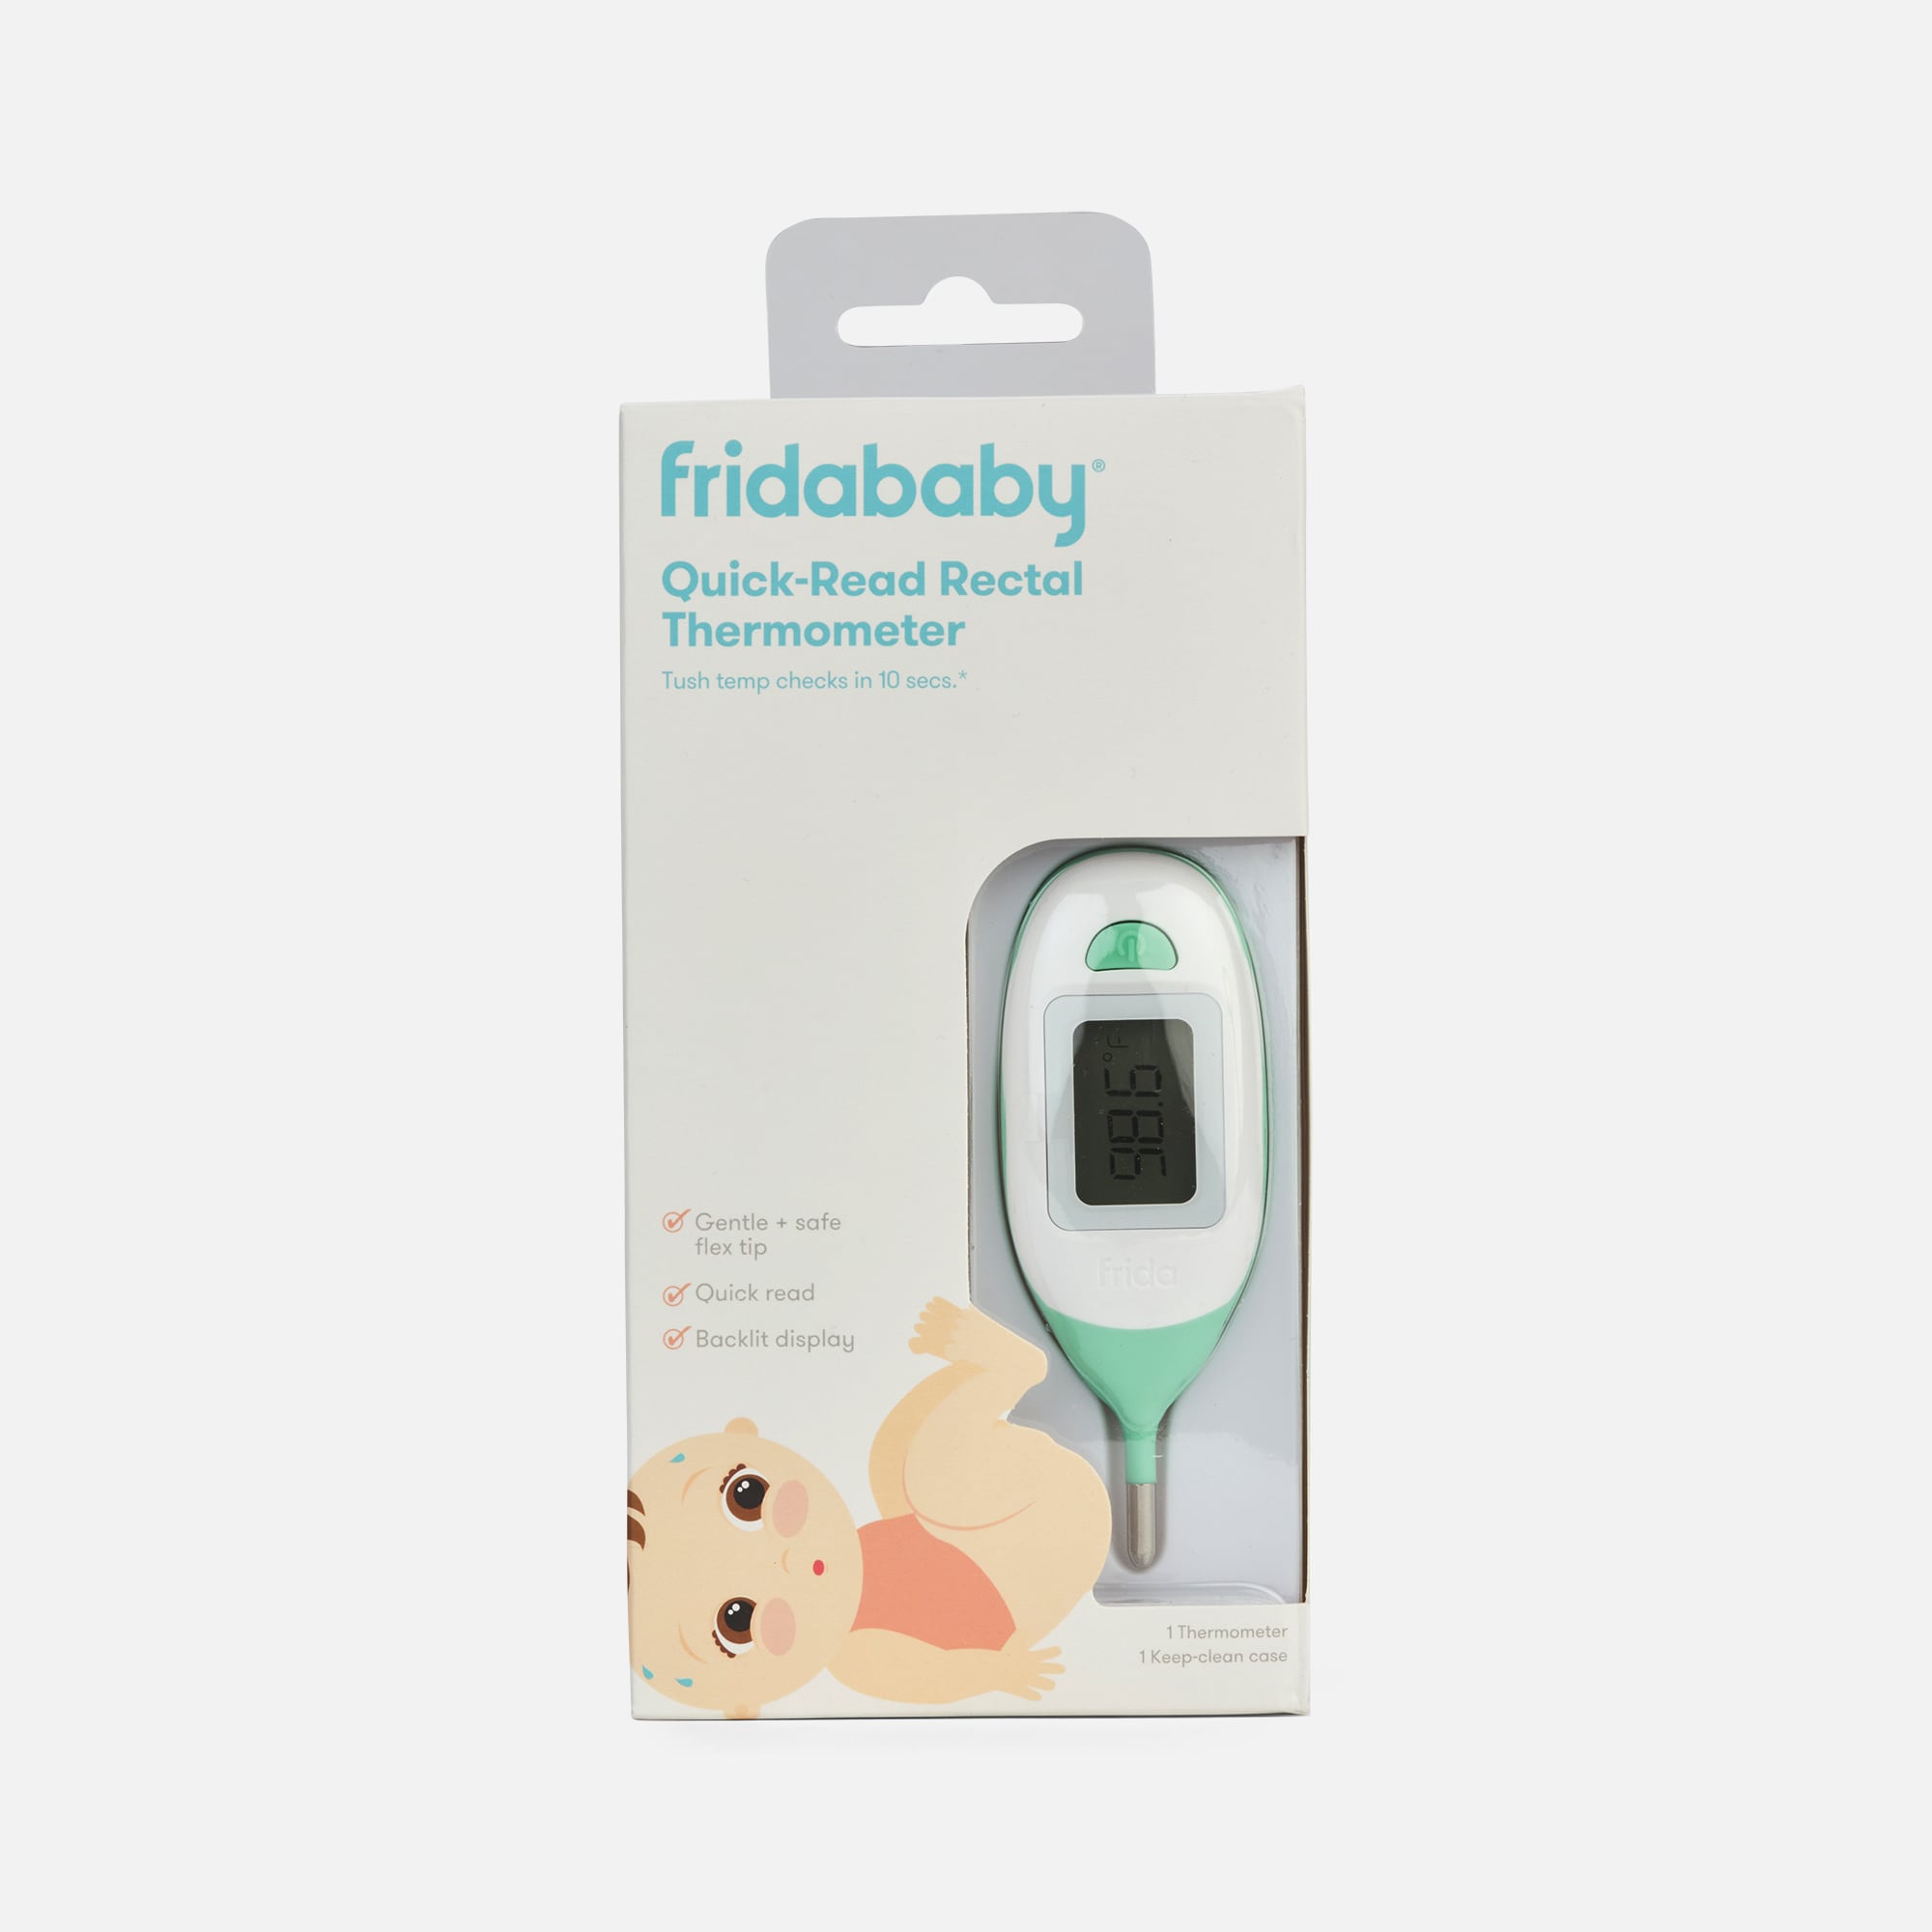 https://fsastore.com/on/demandware.static/-/Sites-hec-master/default/dwf448b781/images/large/quick-read-digital-rectal-thermometer-by-frida-baby_001_40777.jpg